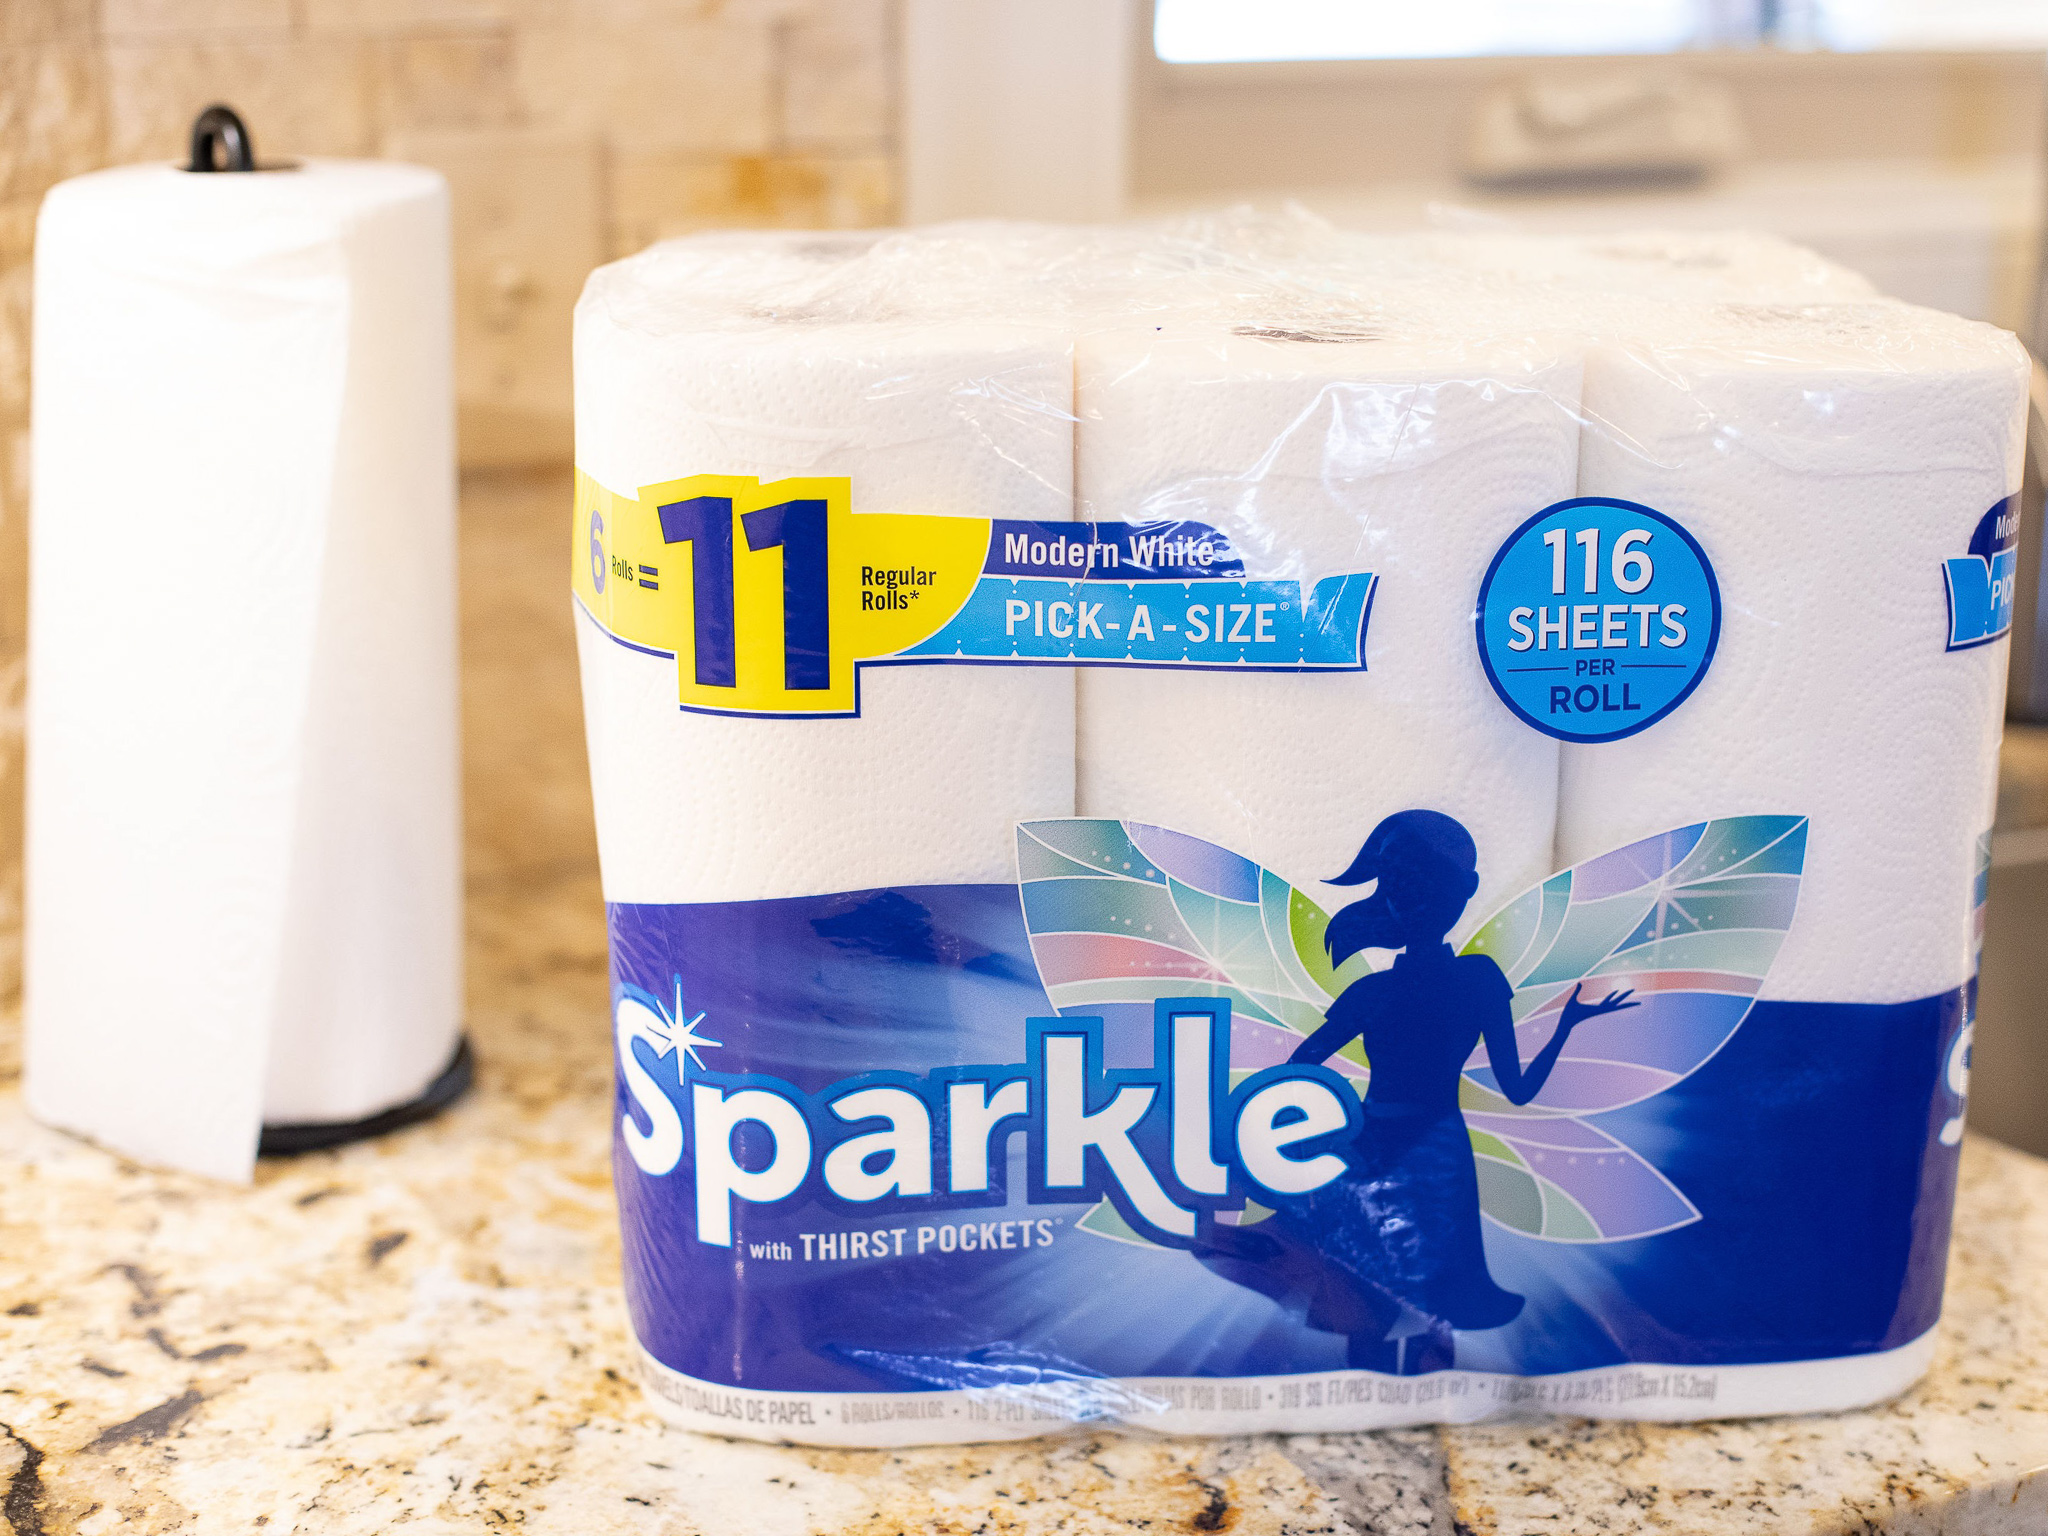 Sparkle Paper Towels As Low As $4.99 At Kroger